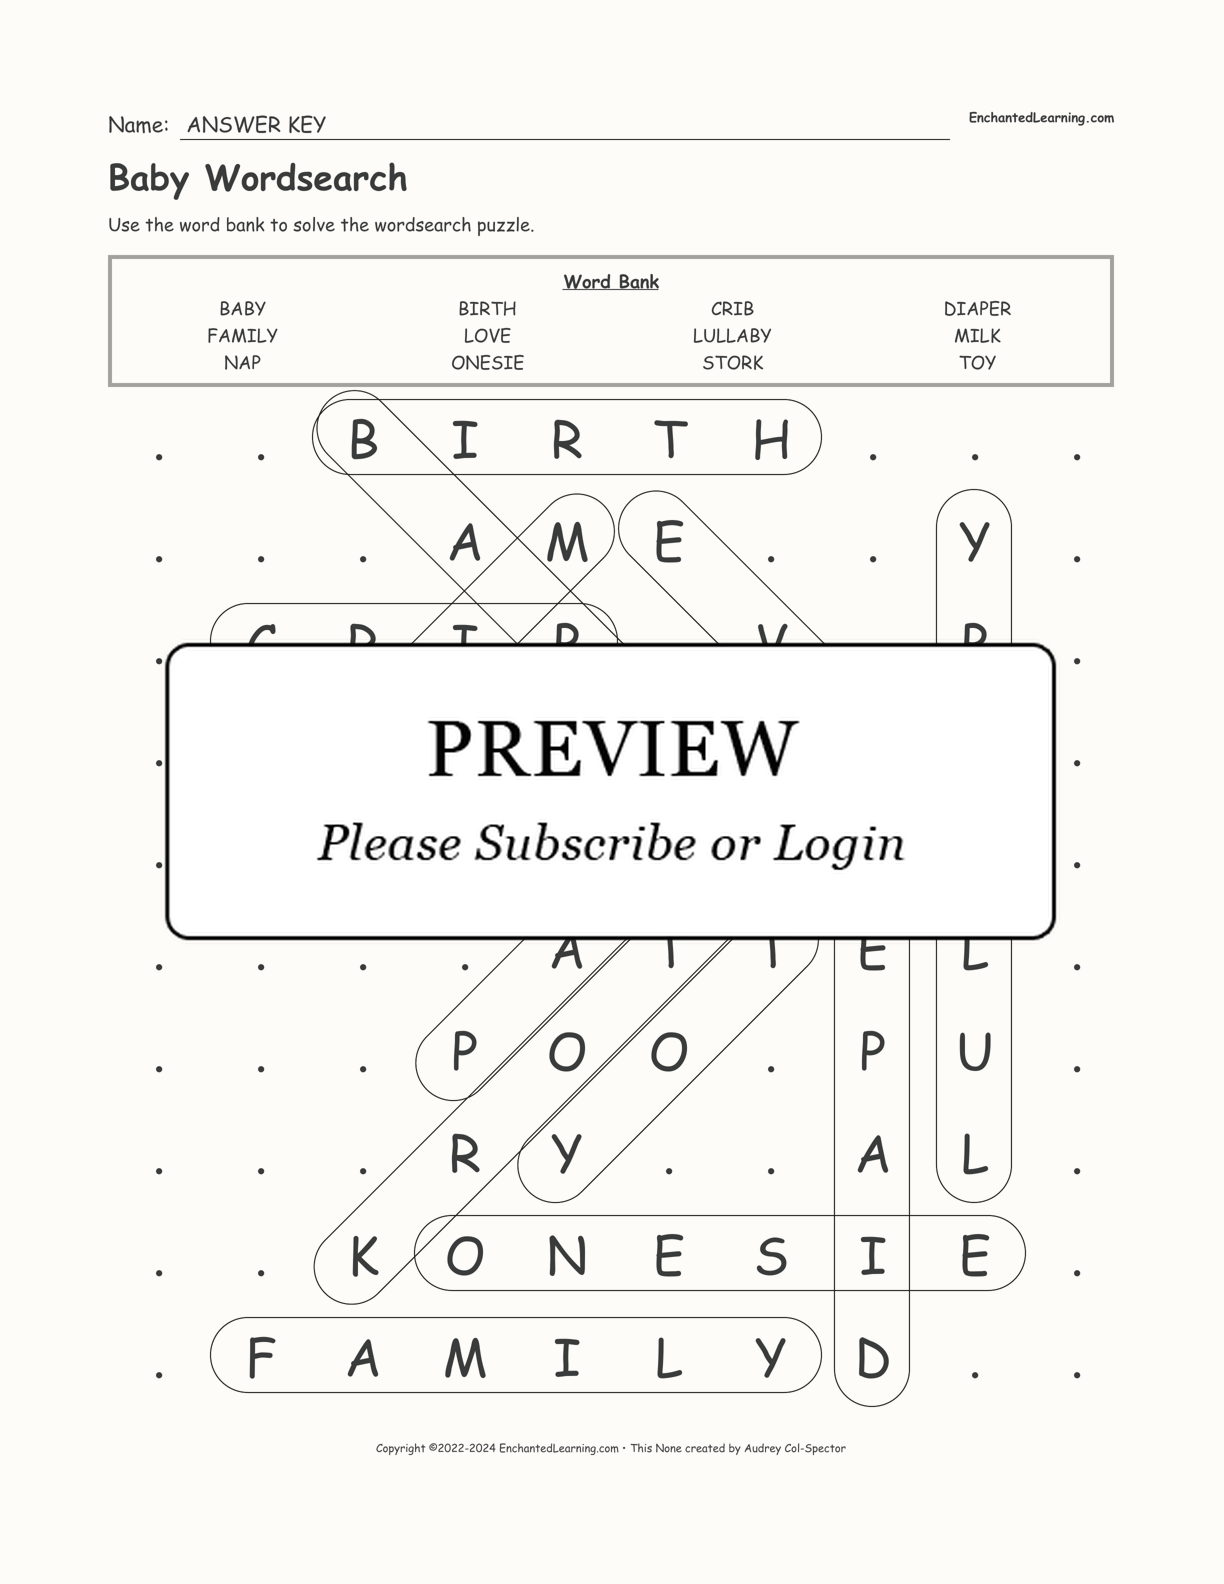 Baby Wordsearch interactive worksheet page 2